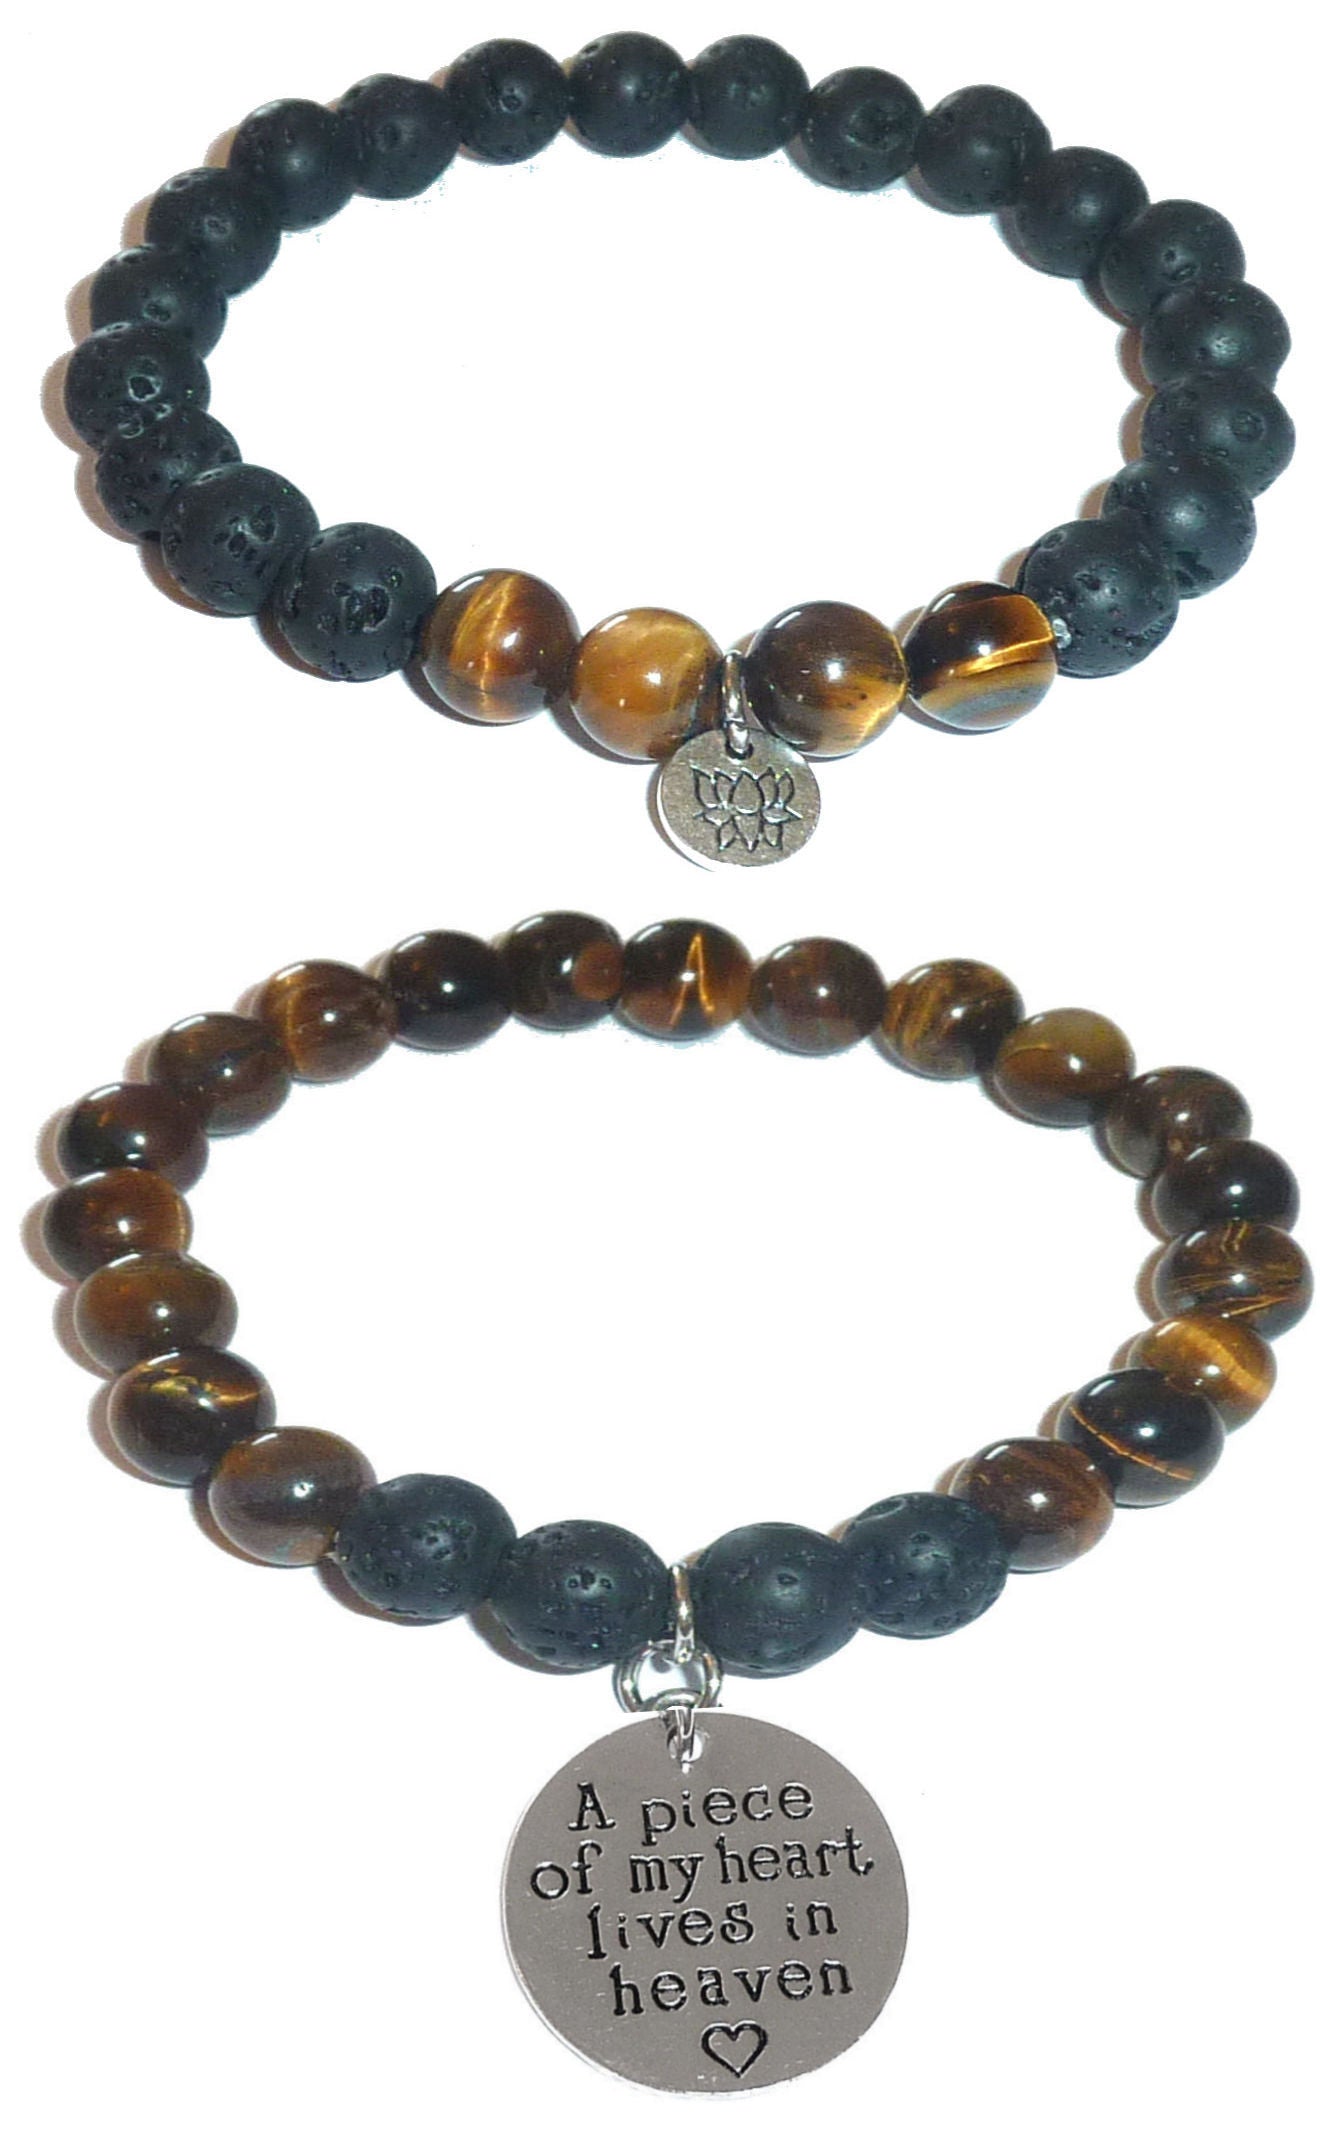 A Piece Of My Heart Is In Heaven - Women's Tiger Eye & Black Lava Diffuser Yoga Beads Charm Stretch Bracelet Gift Set